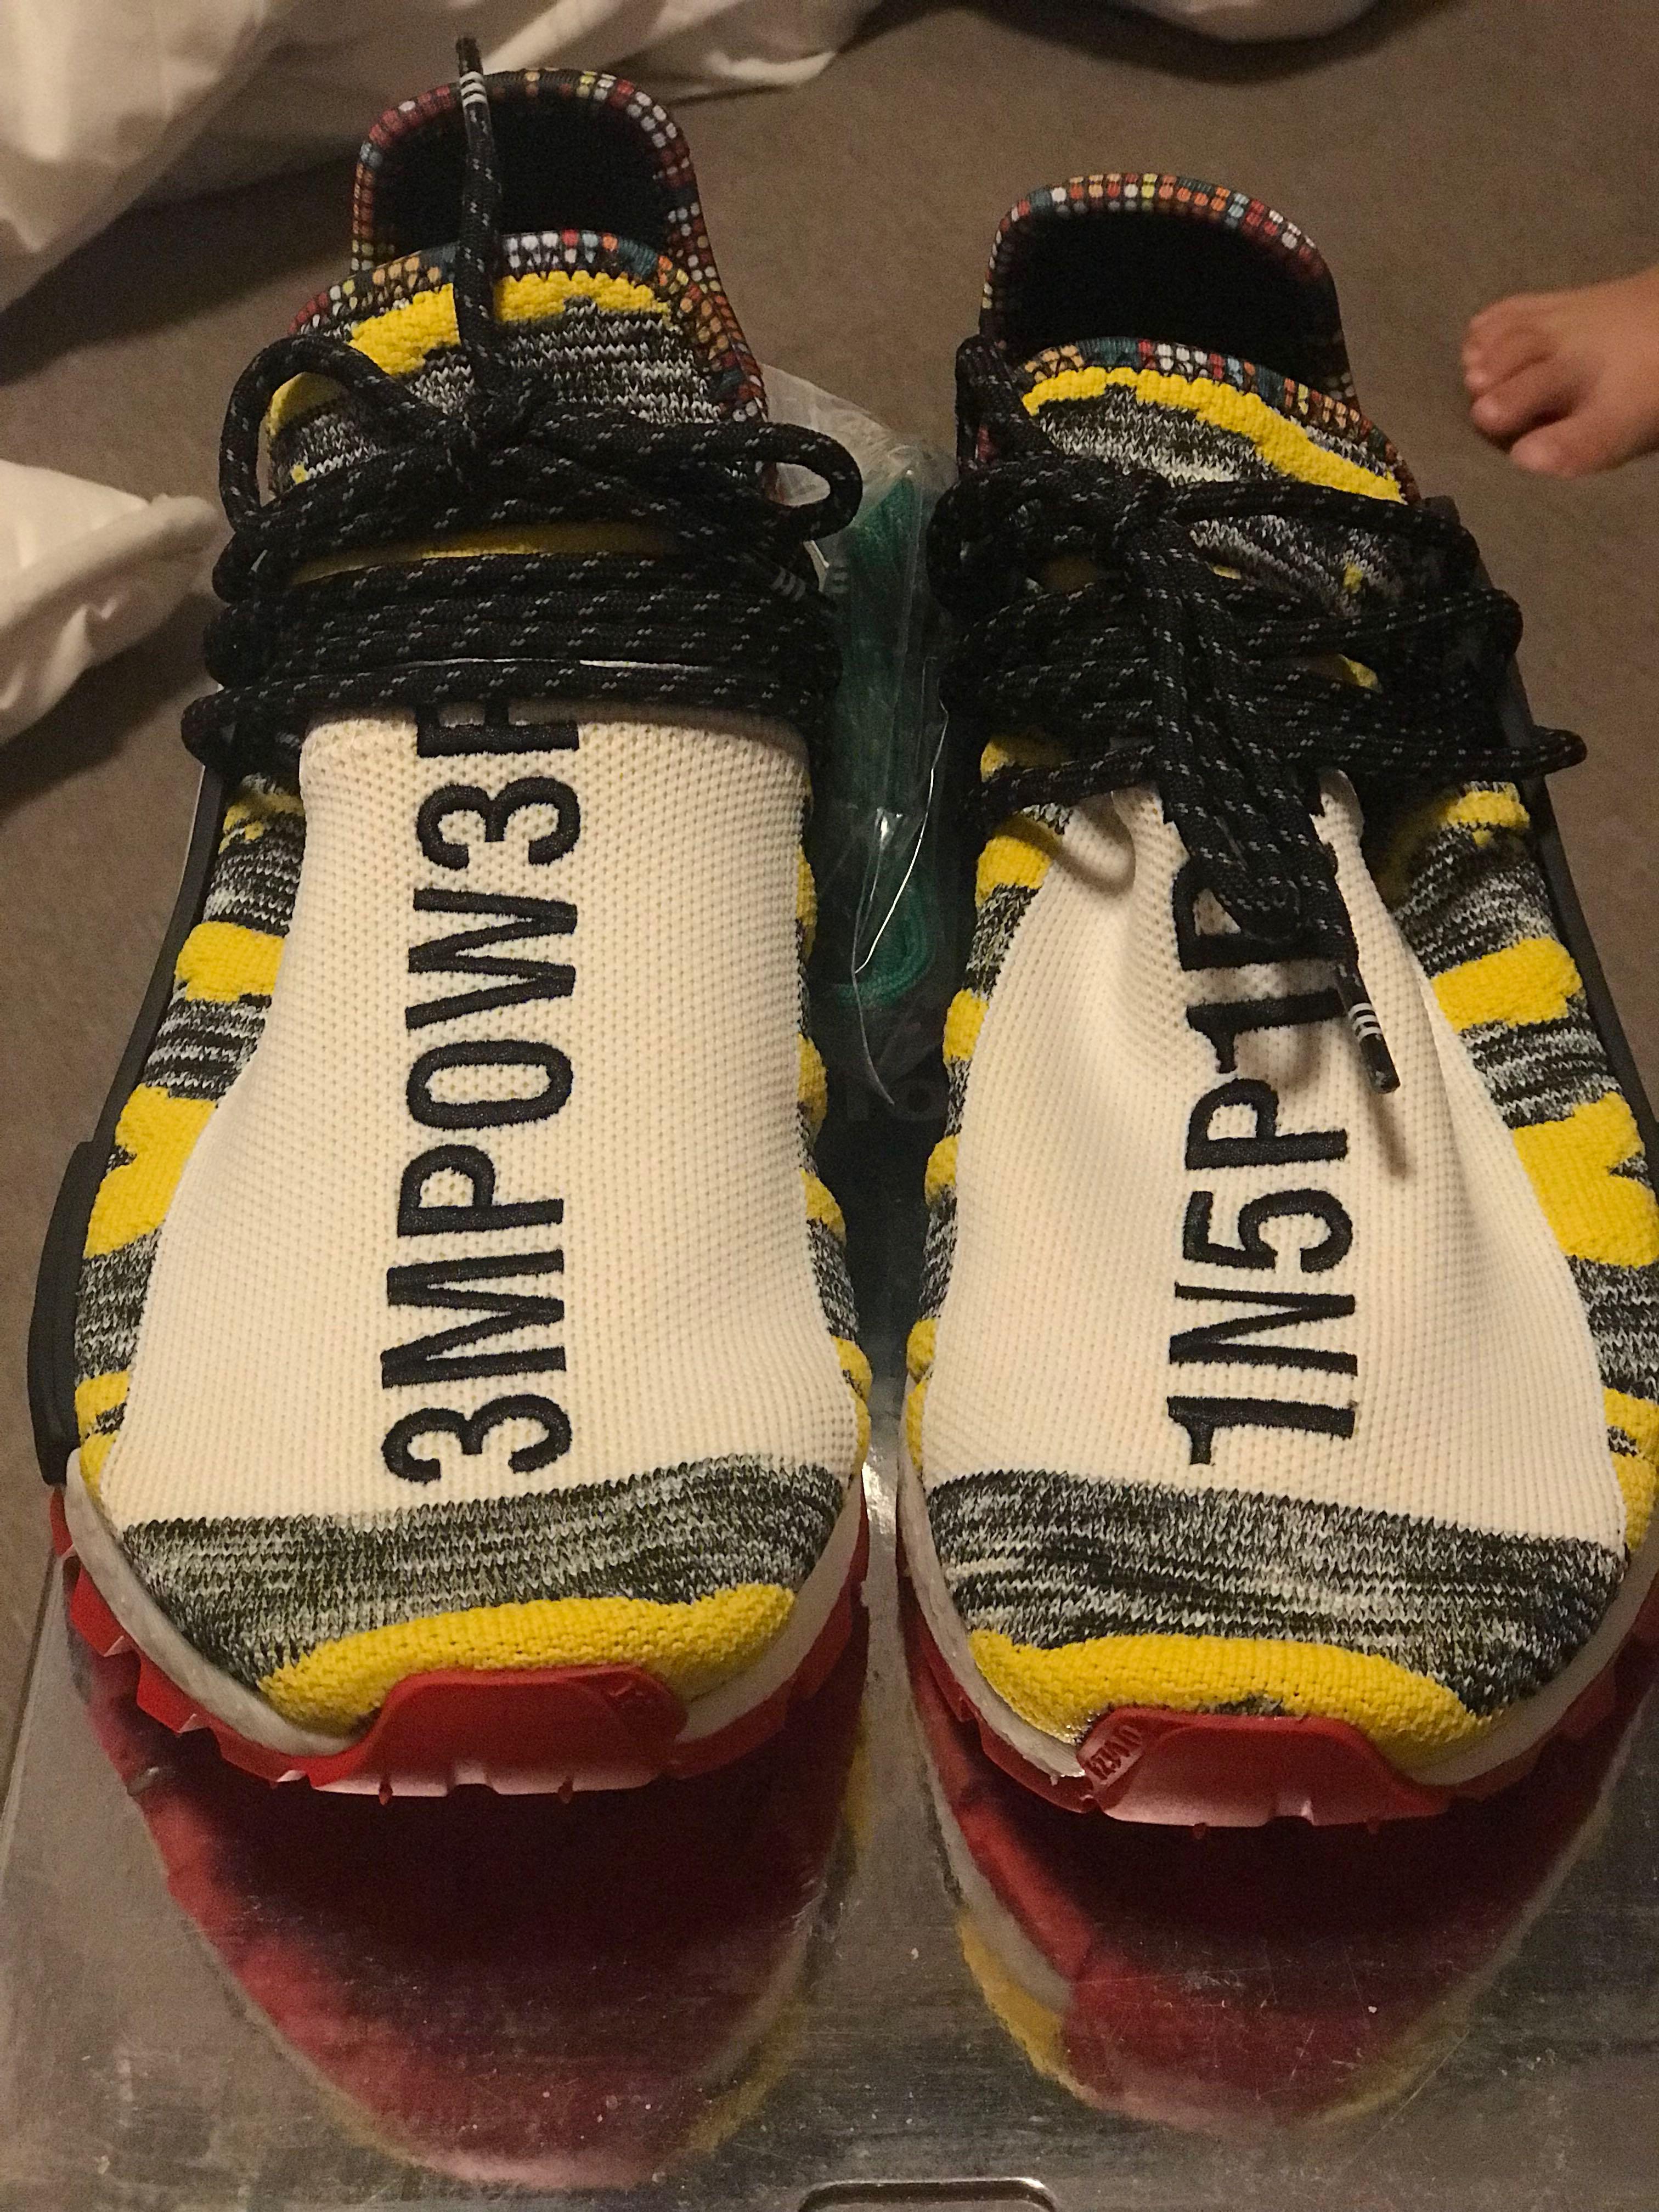 Upcoming Adidas PW HU NMD PRD Shoes 2019 YouTube